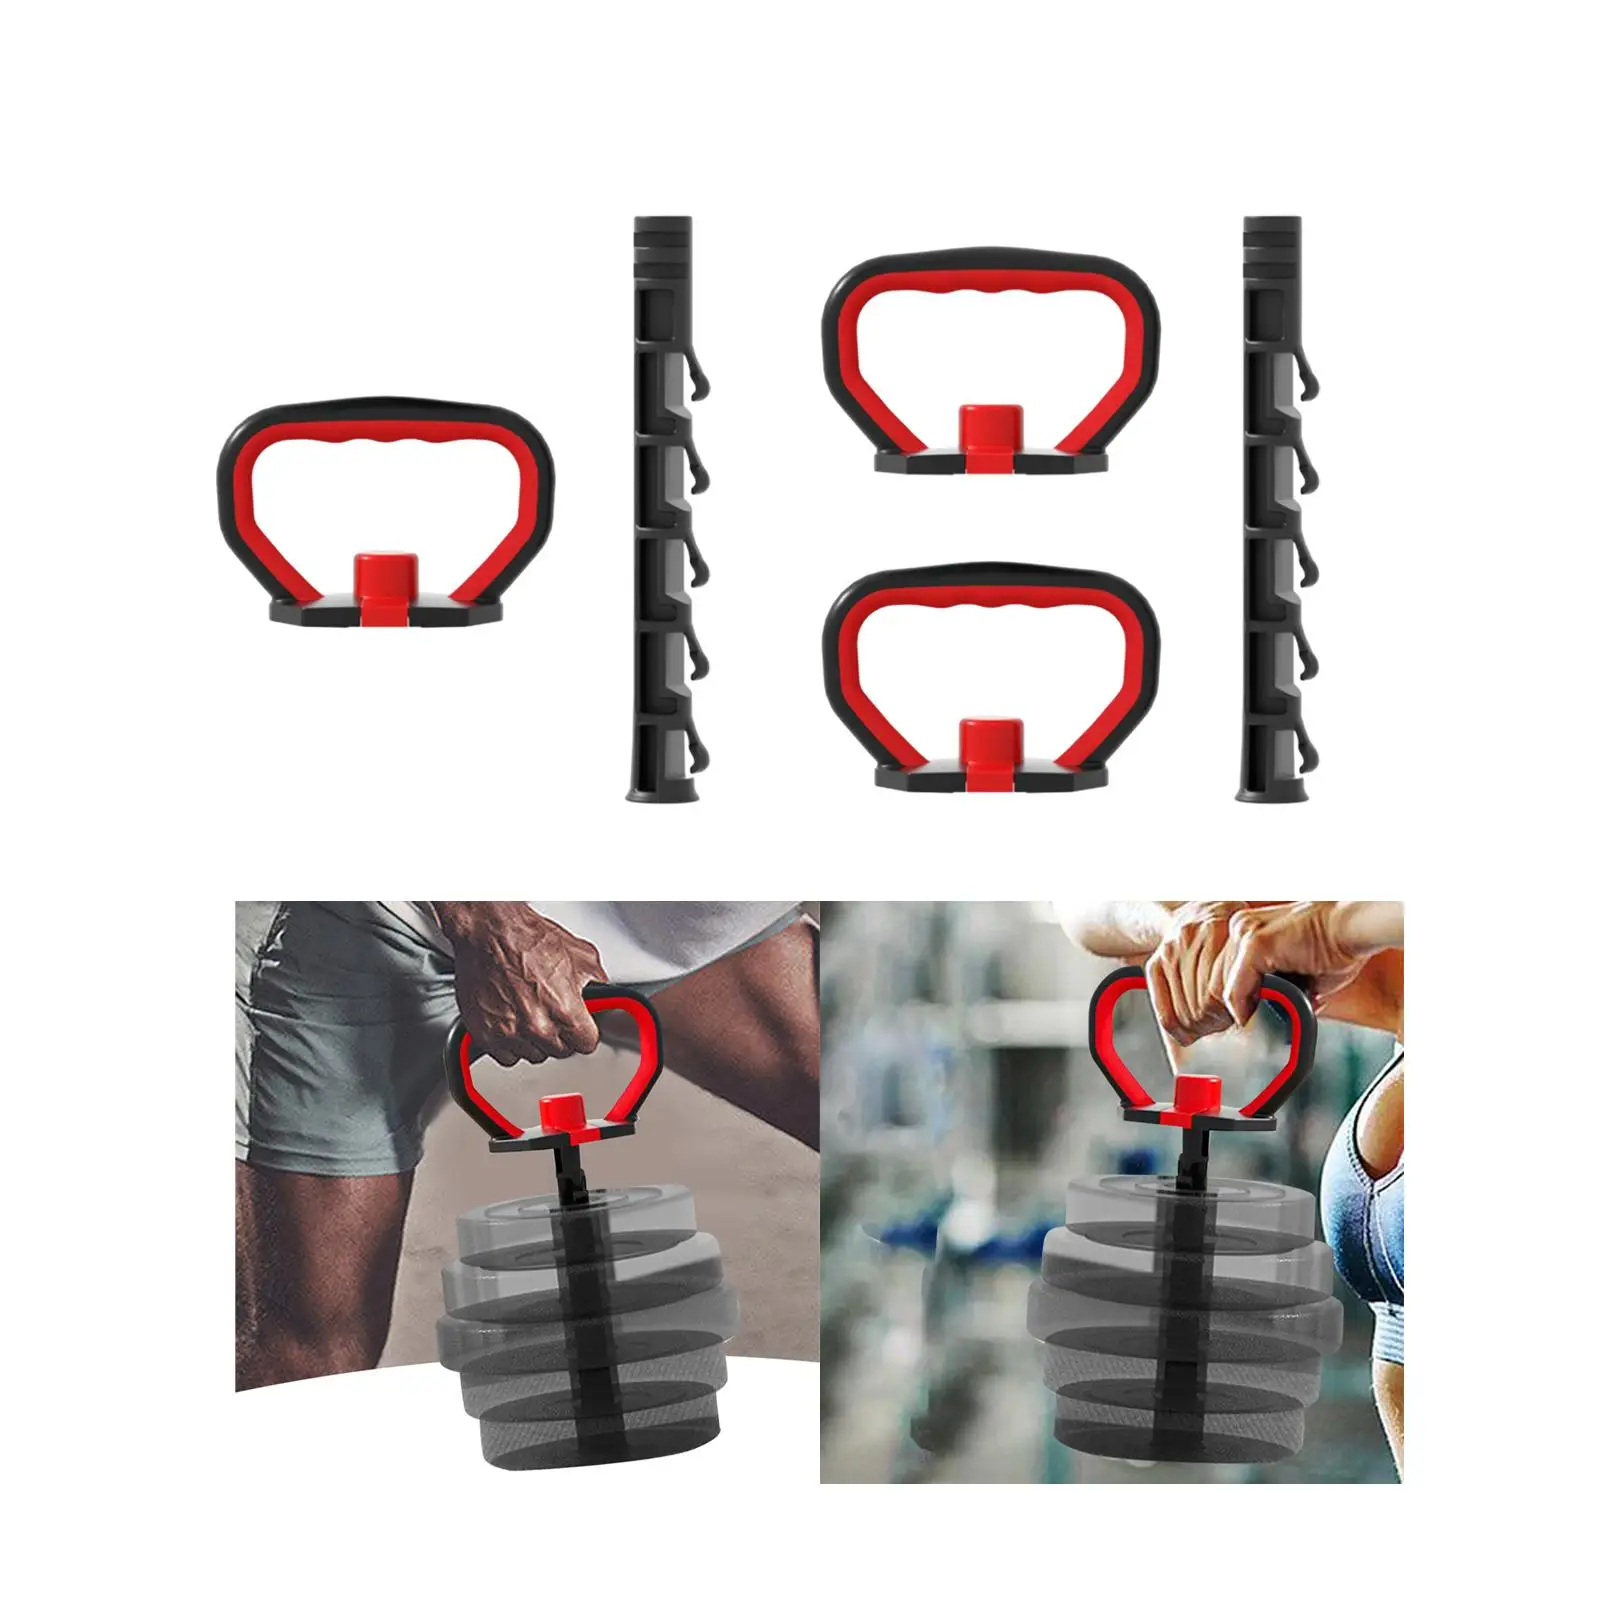 Adjustable Kettlebell Handle with Base Dumbbell Grip Home Gym Workout Kettlebell Push up Multifunctional Fitness Kettlebell Grip